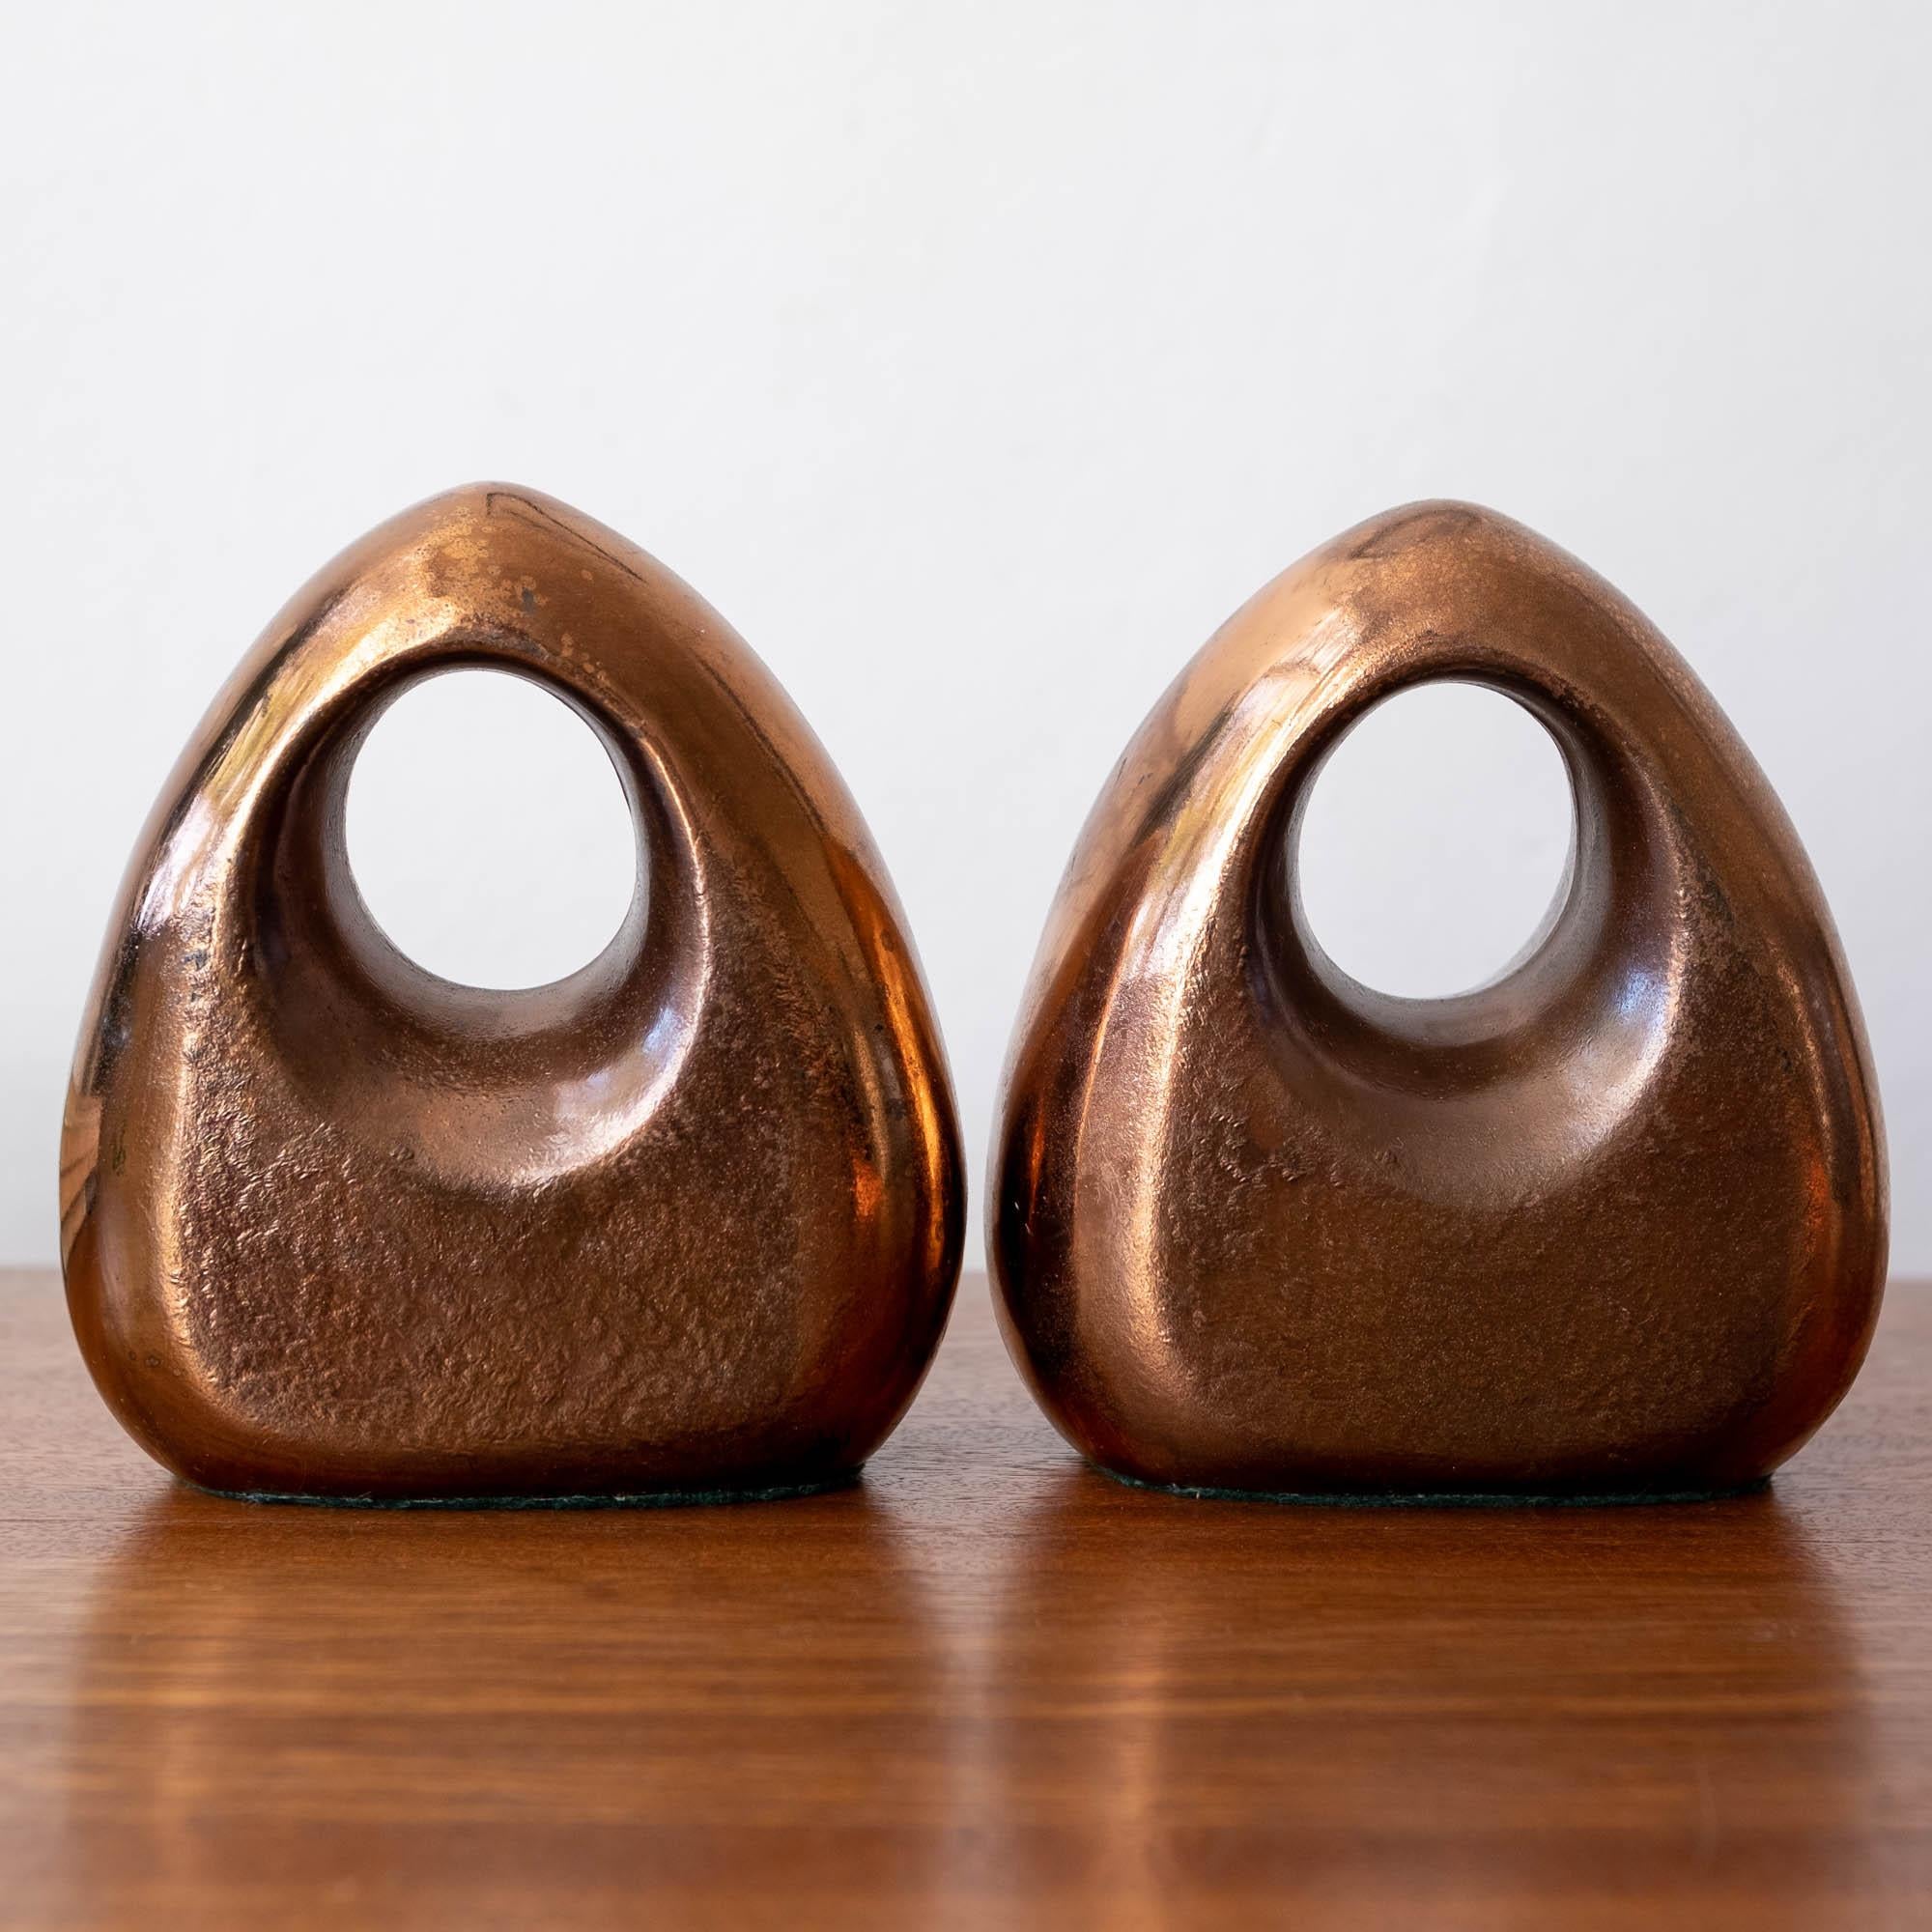 20th Century Copper Bookends by Ben Seibel for Jenfred-Ware